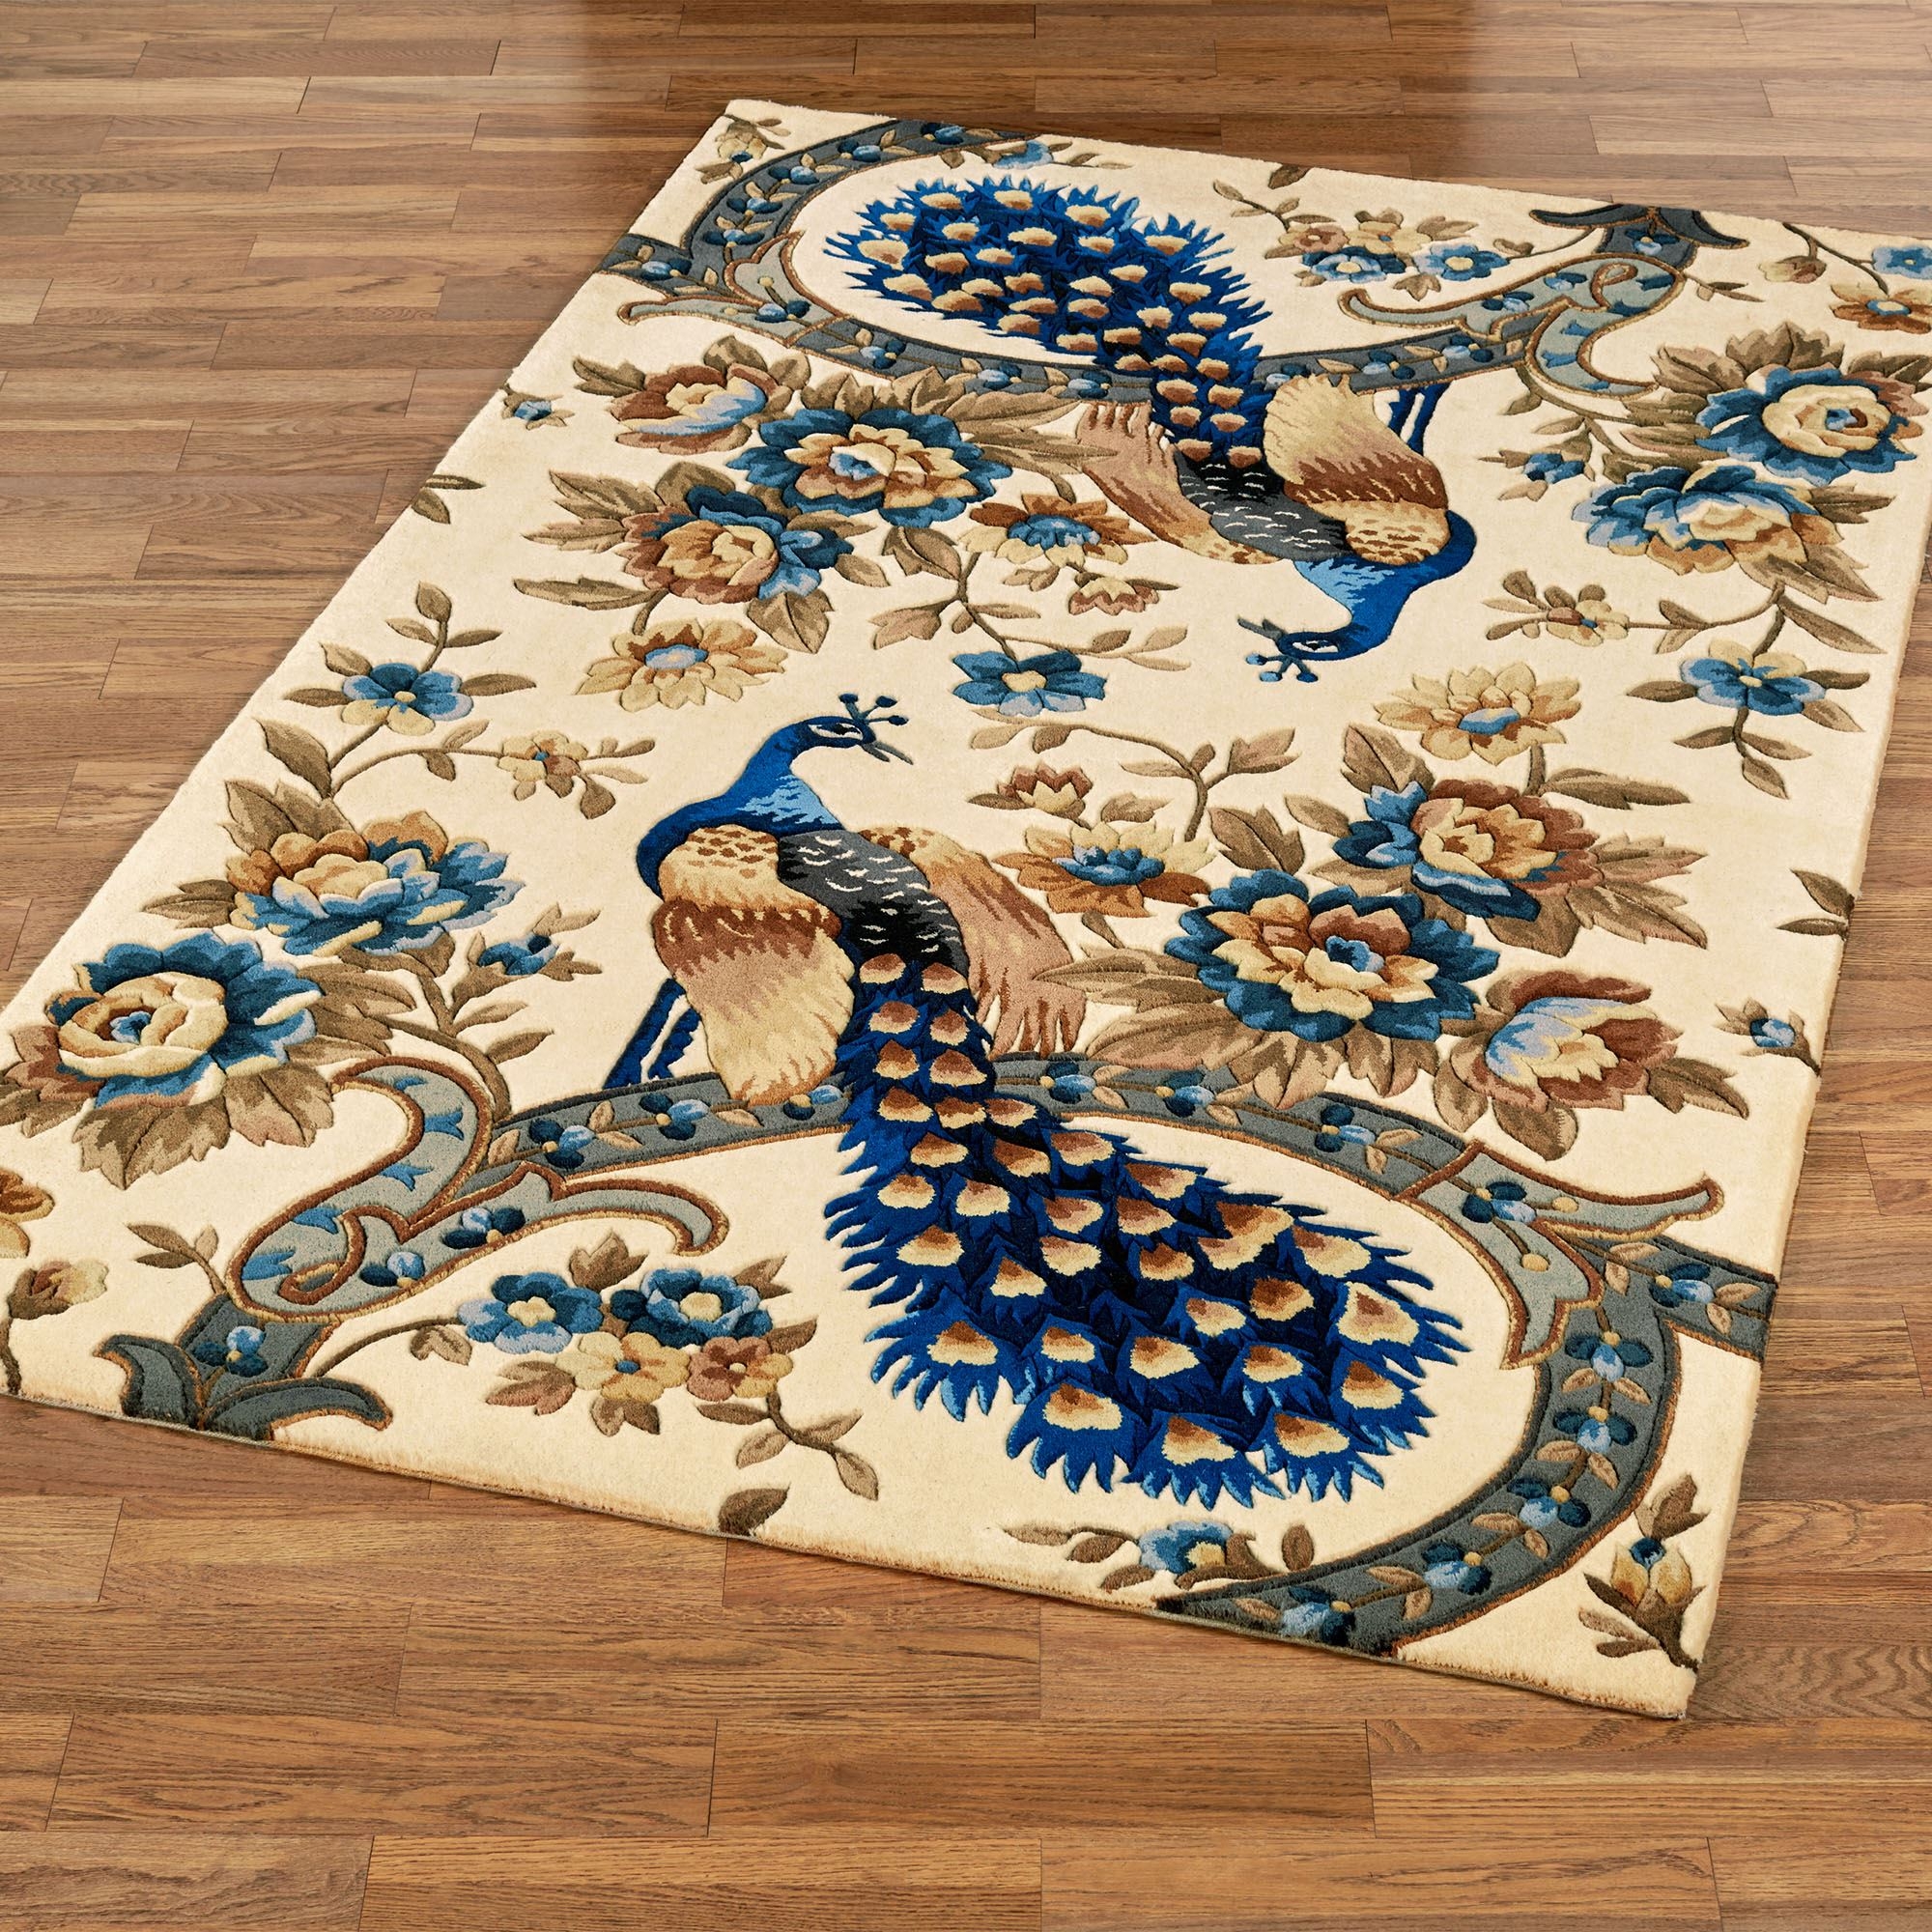 Rubber Backed Area Rugs Visualhunt, Rubber Backed Rugs On Hardwood Floors